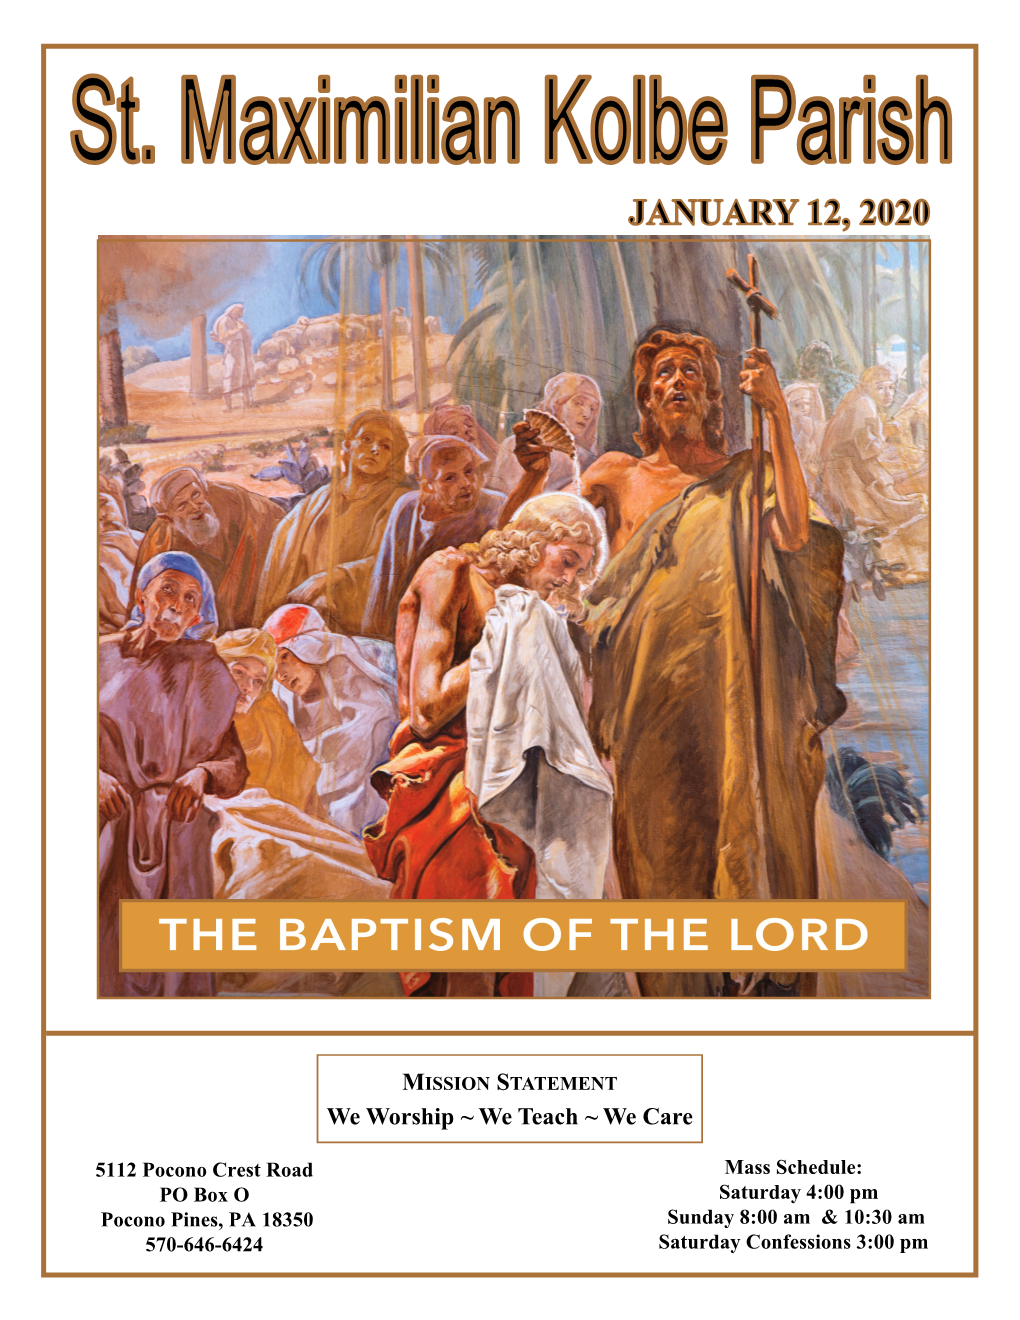 January 12, 2020 the Catechism of the Catholic Church Gives Four Reasons for the Incarnation, Why God Became Man in the BAPTISM of the LORD Jesus Christ